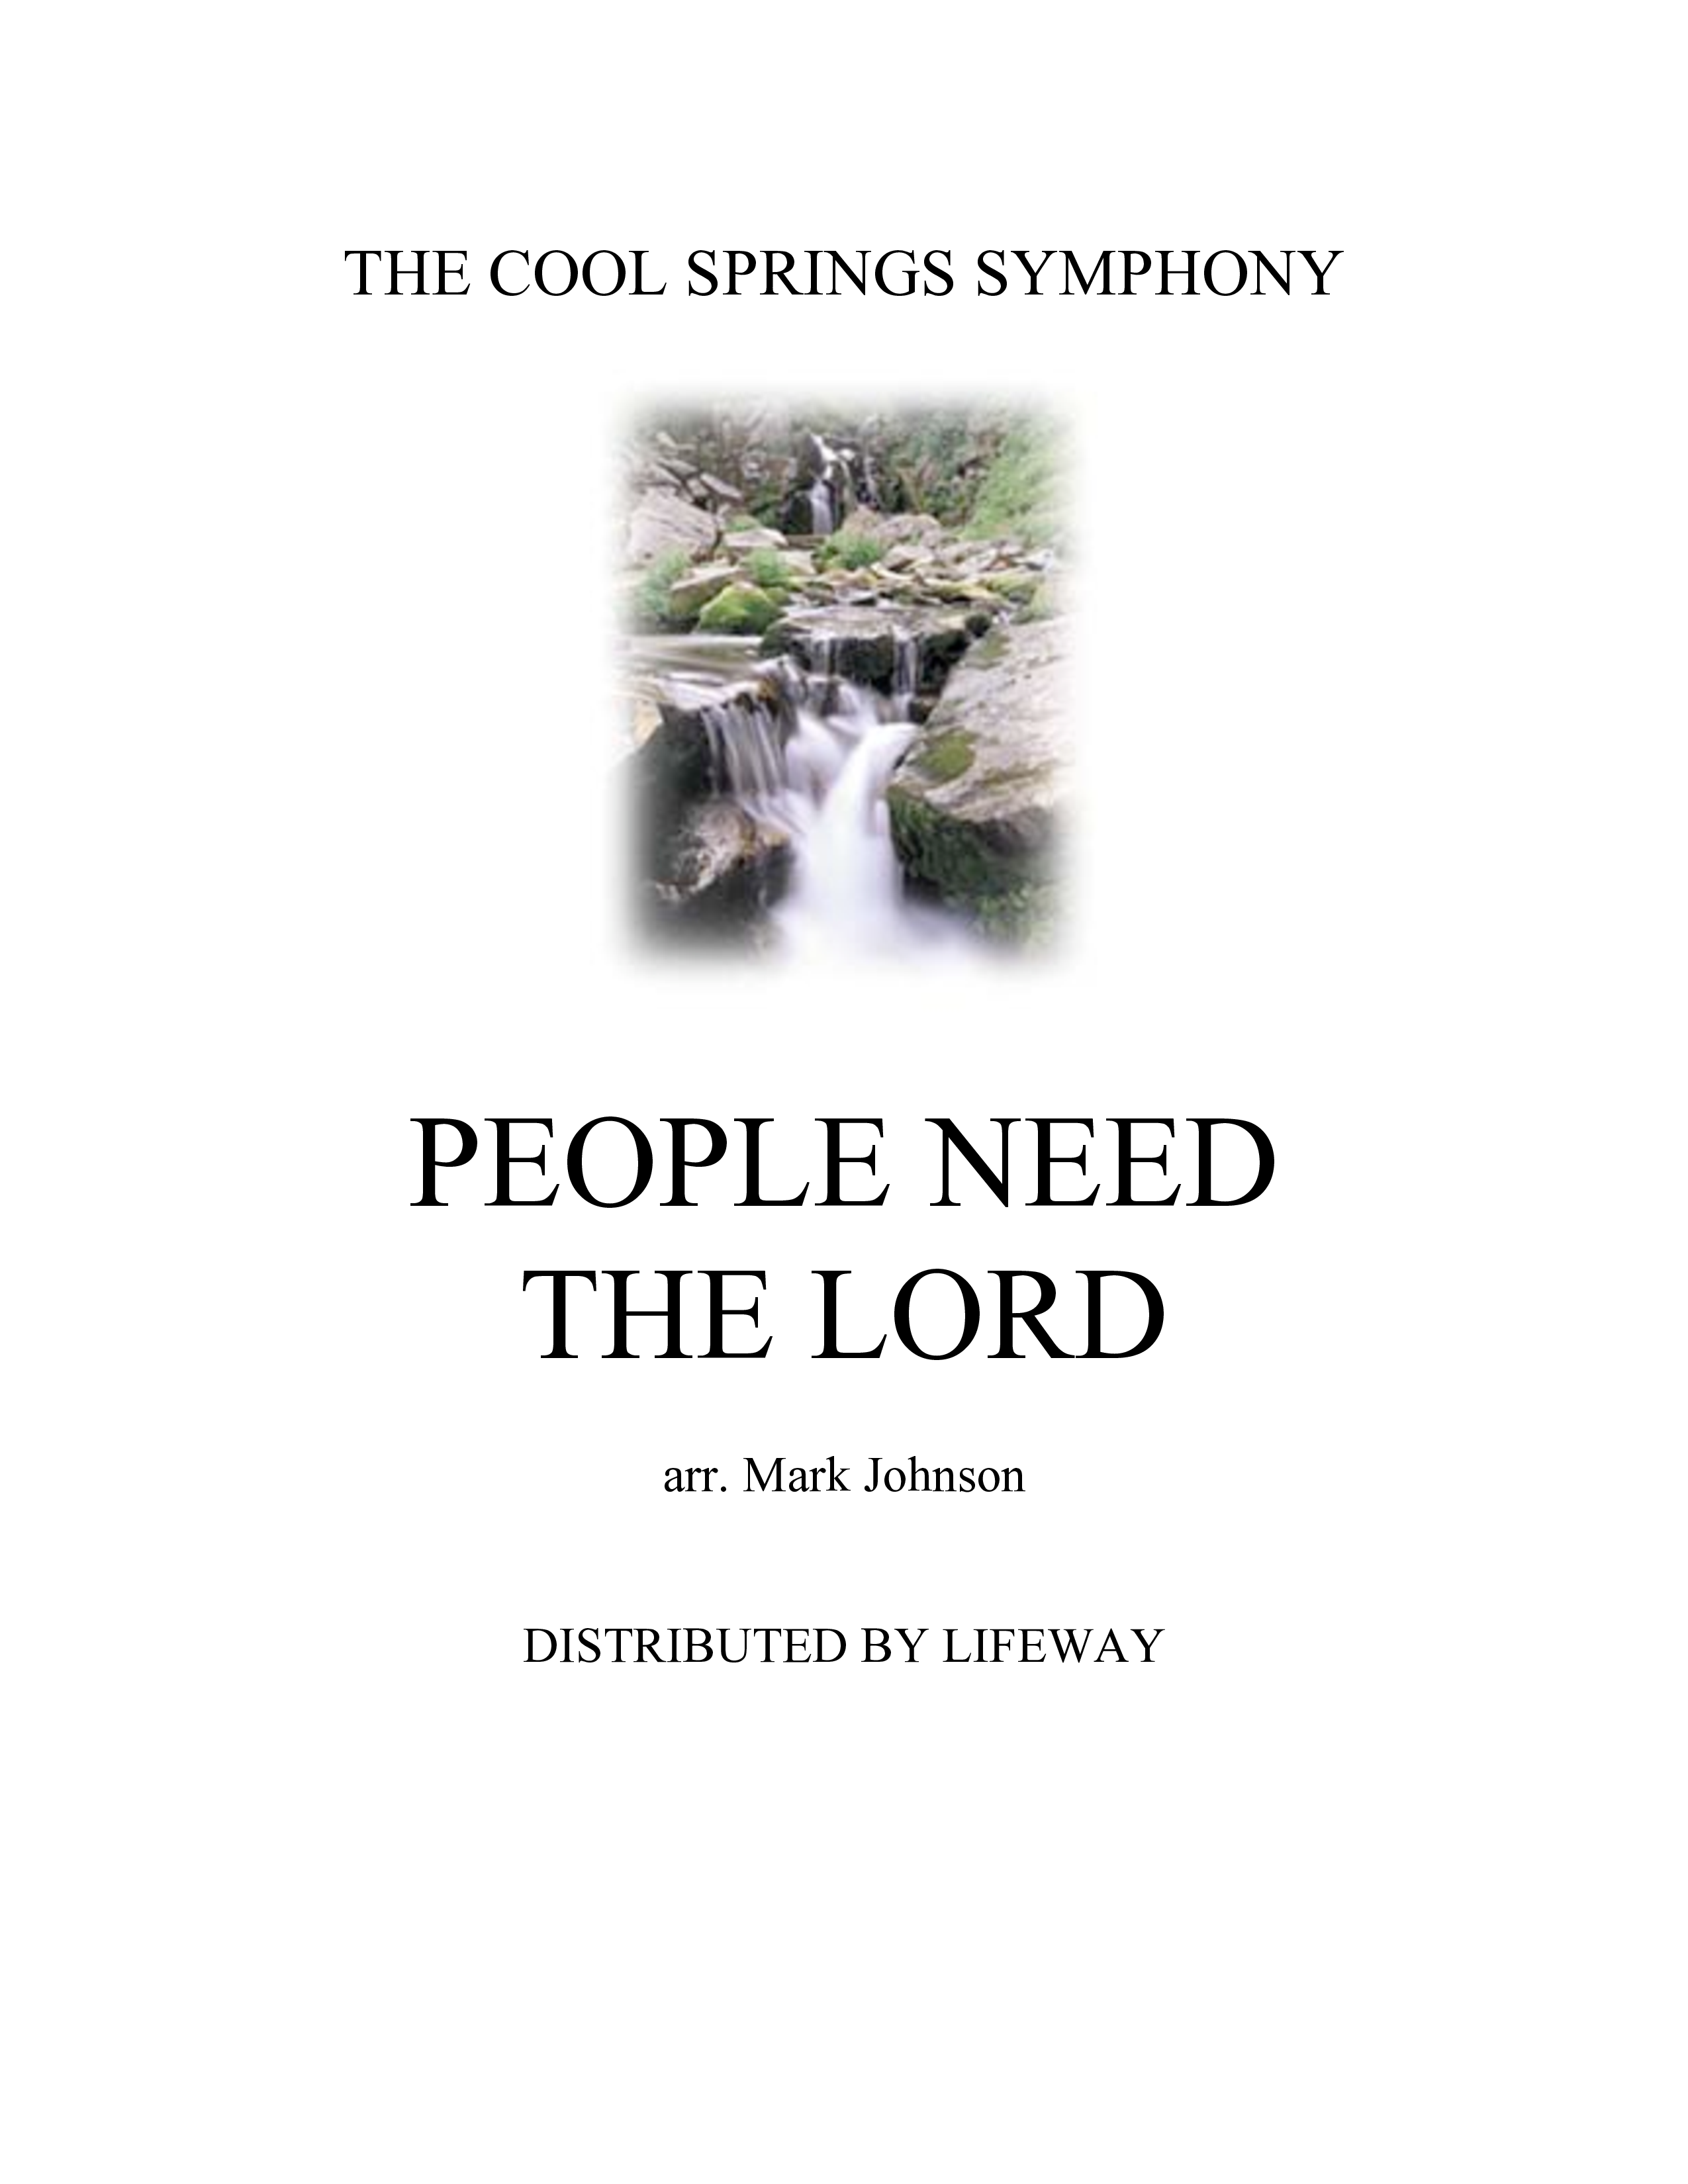 People Need The Lord (Instrumental) Orchestration (Lifeway Worship / Arr. Mark Johnson)